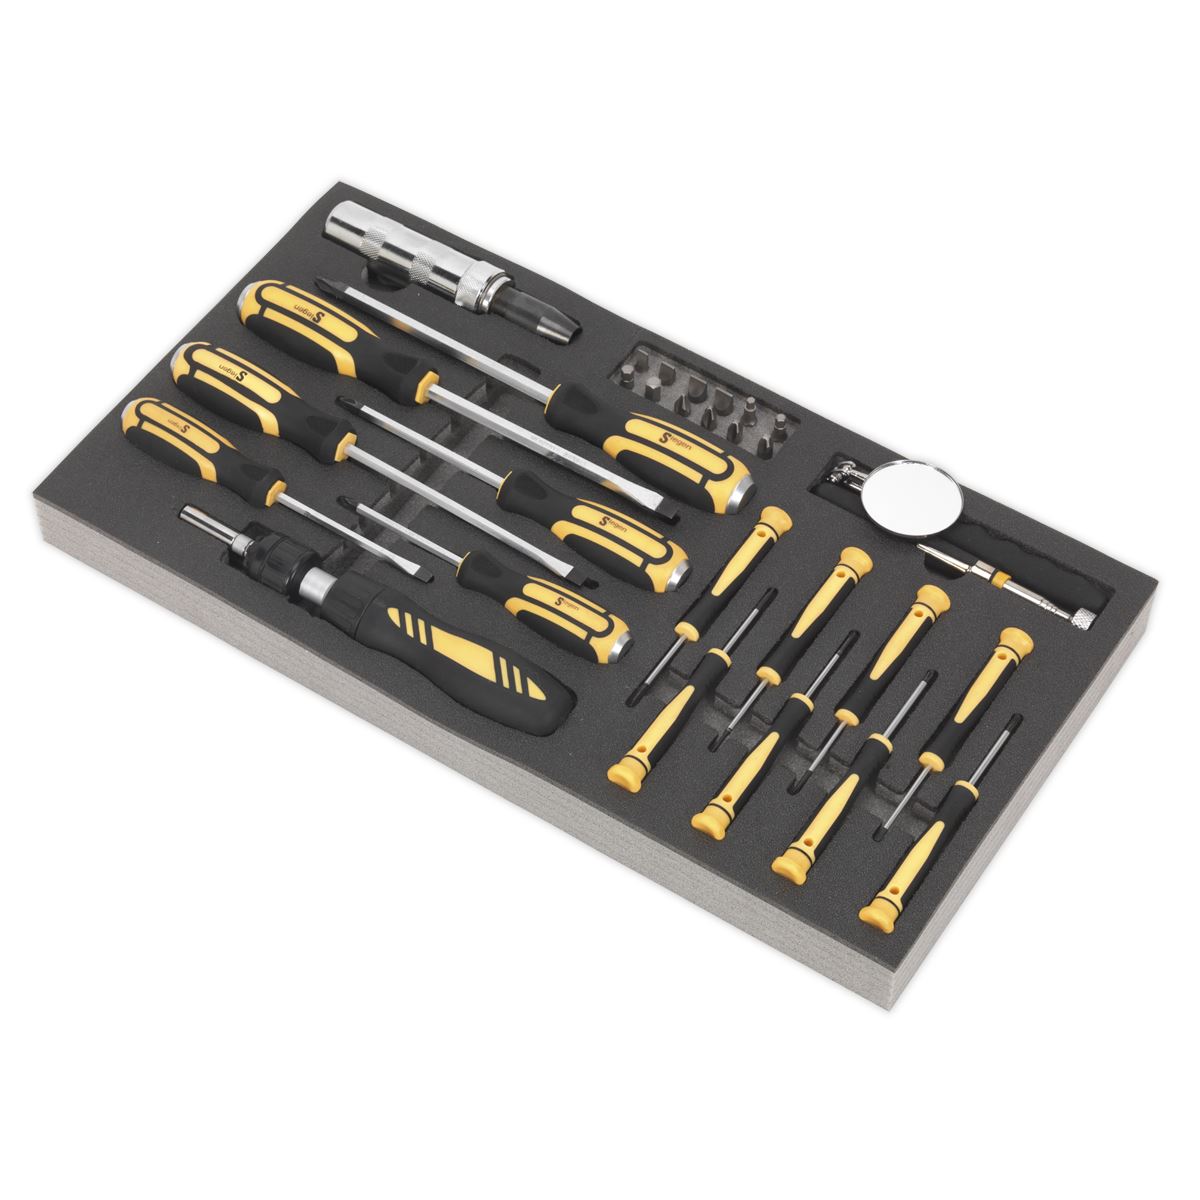 Siegen by Sealey Tool Tray with Screwdriver Set 36pc